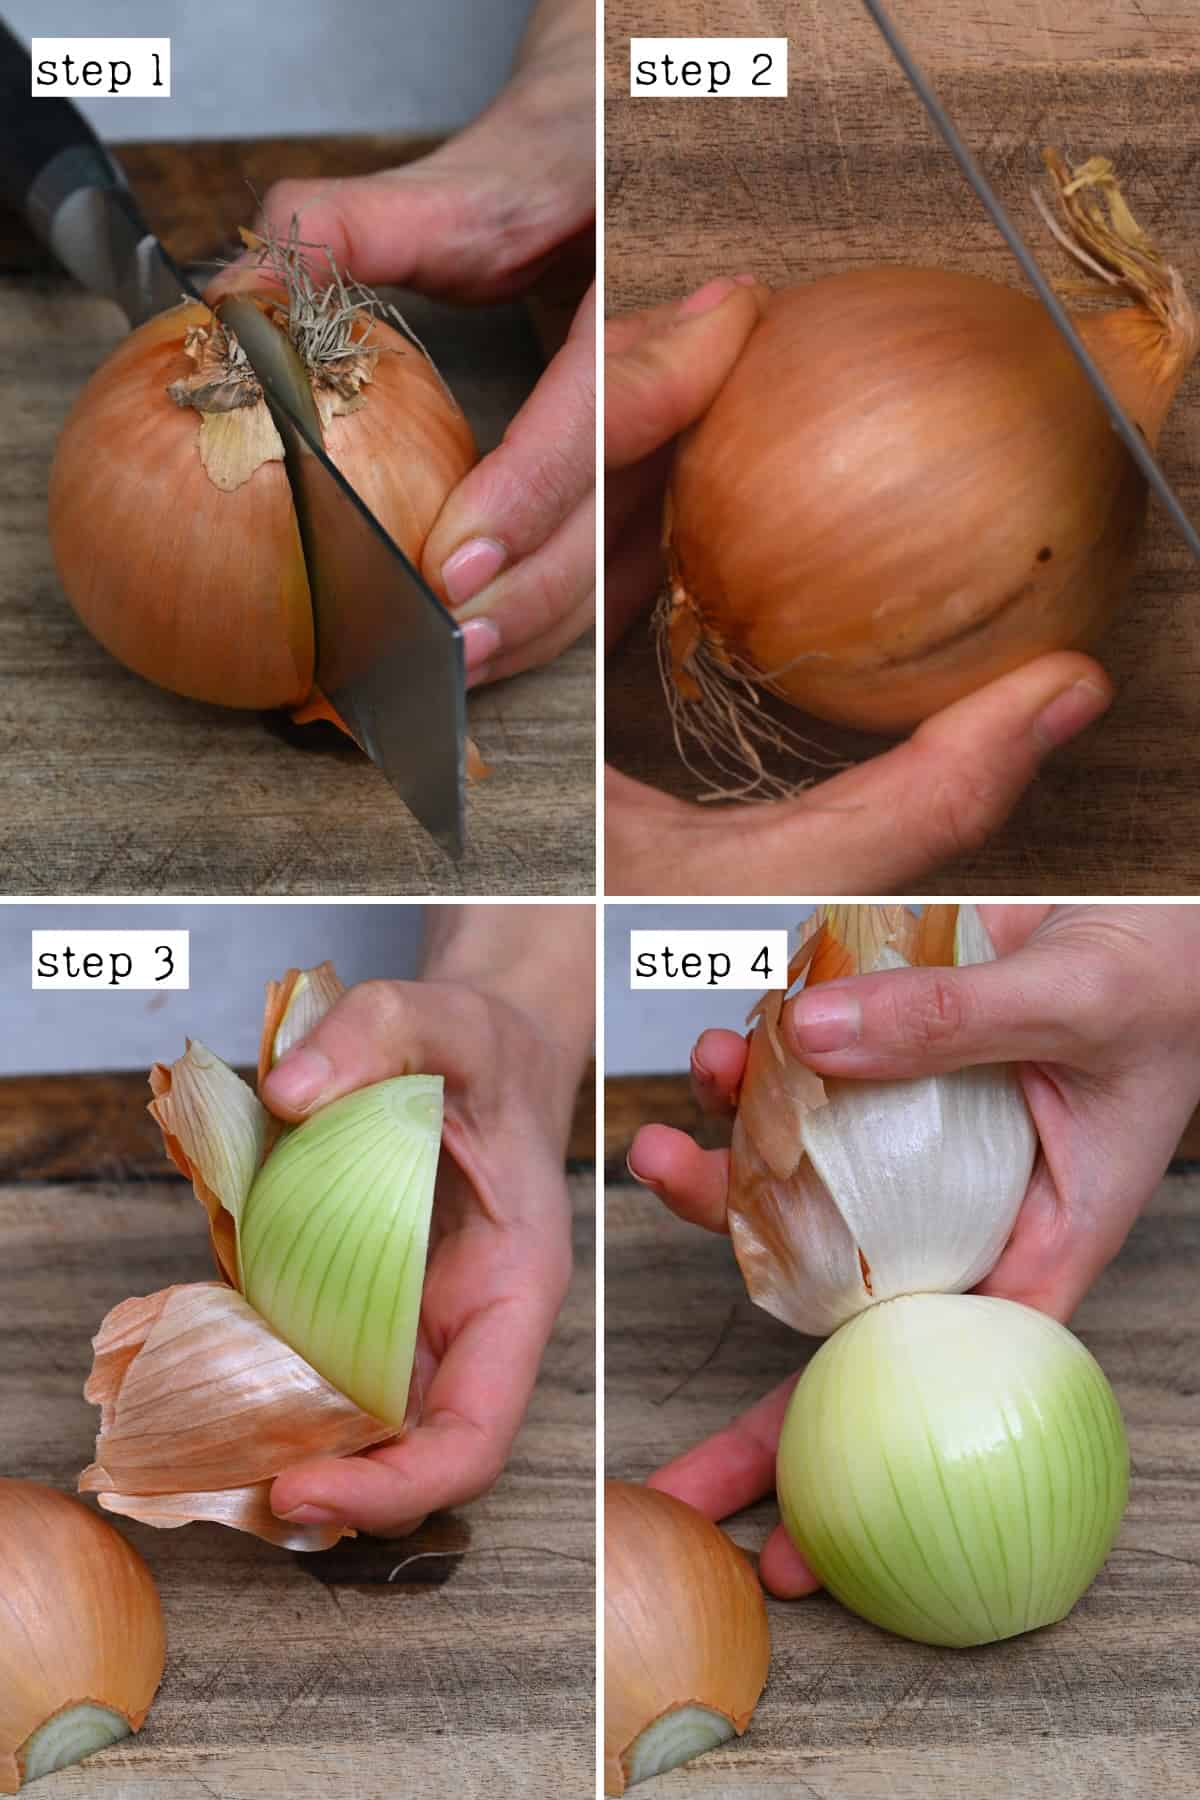 Steps for peeling an onion after cutting it in half